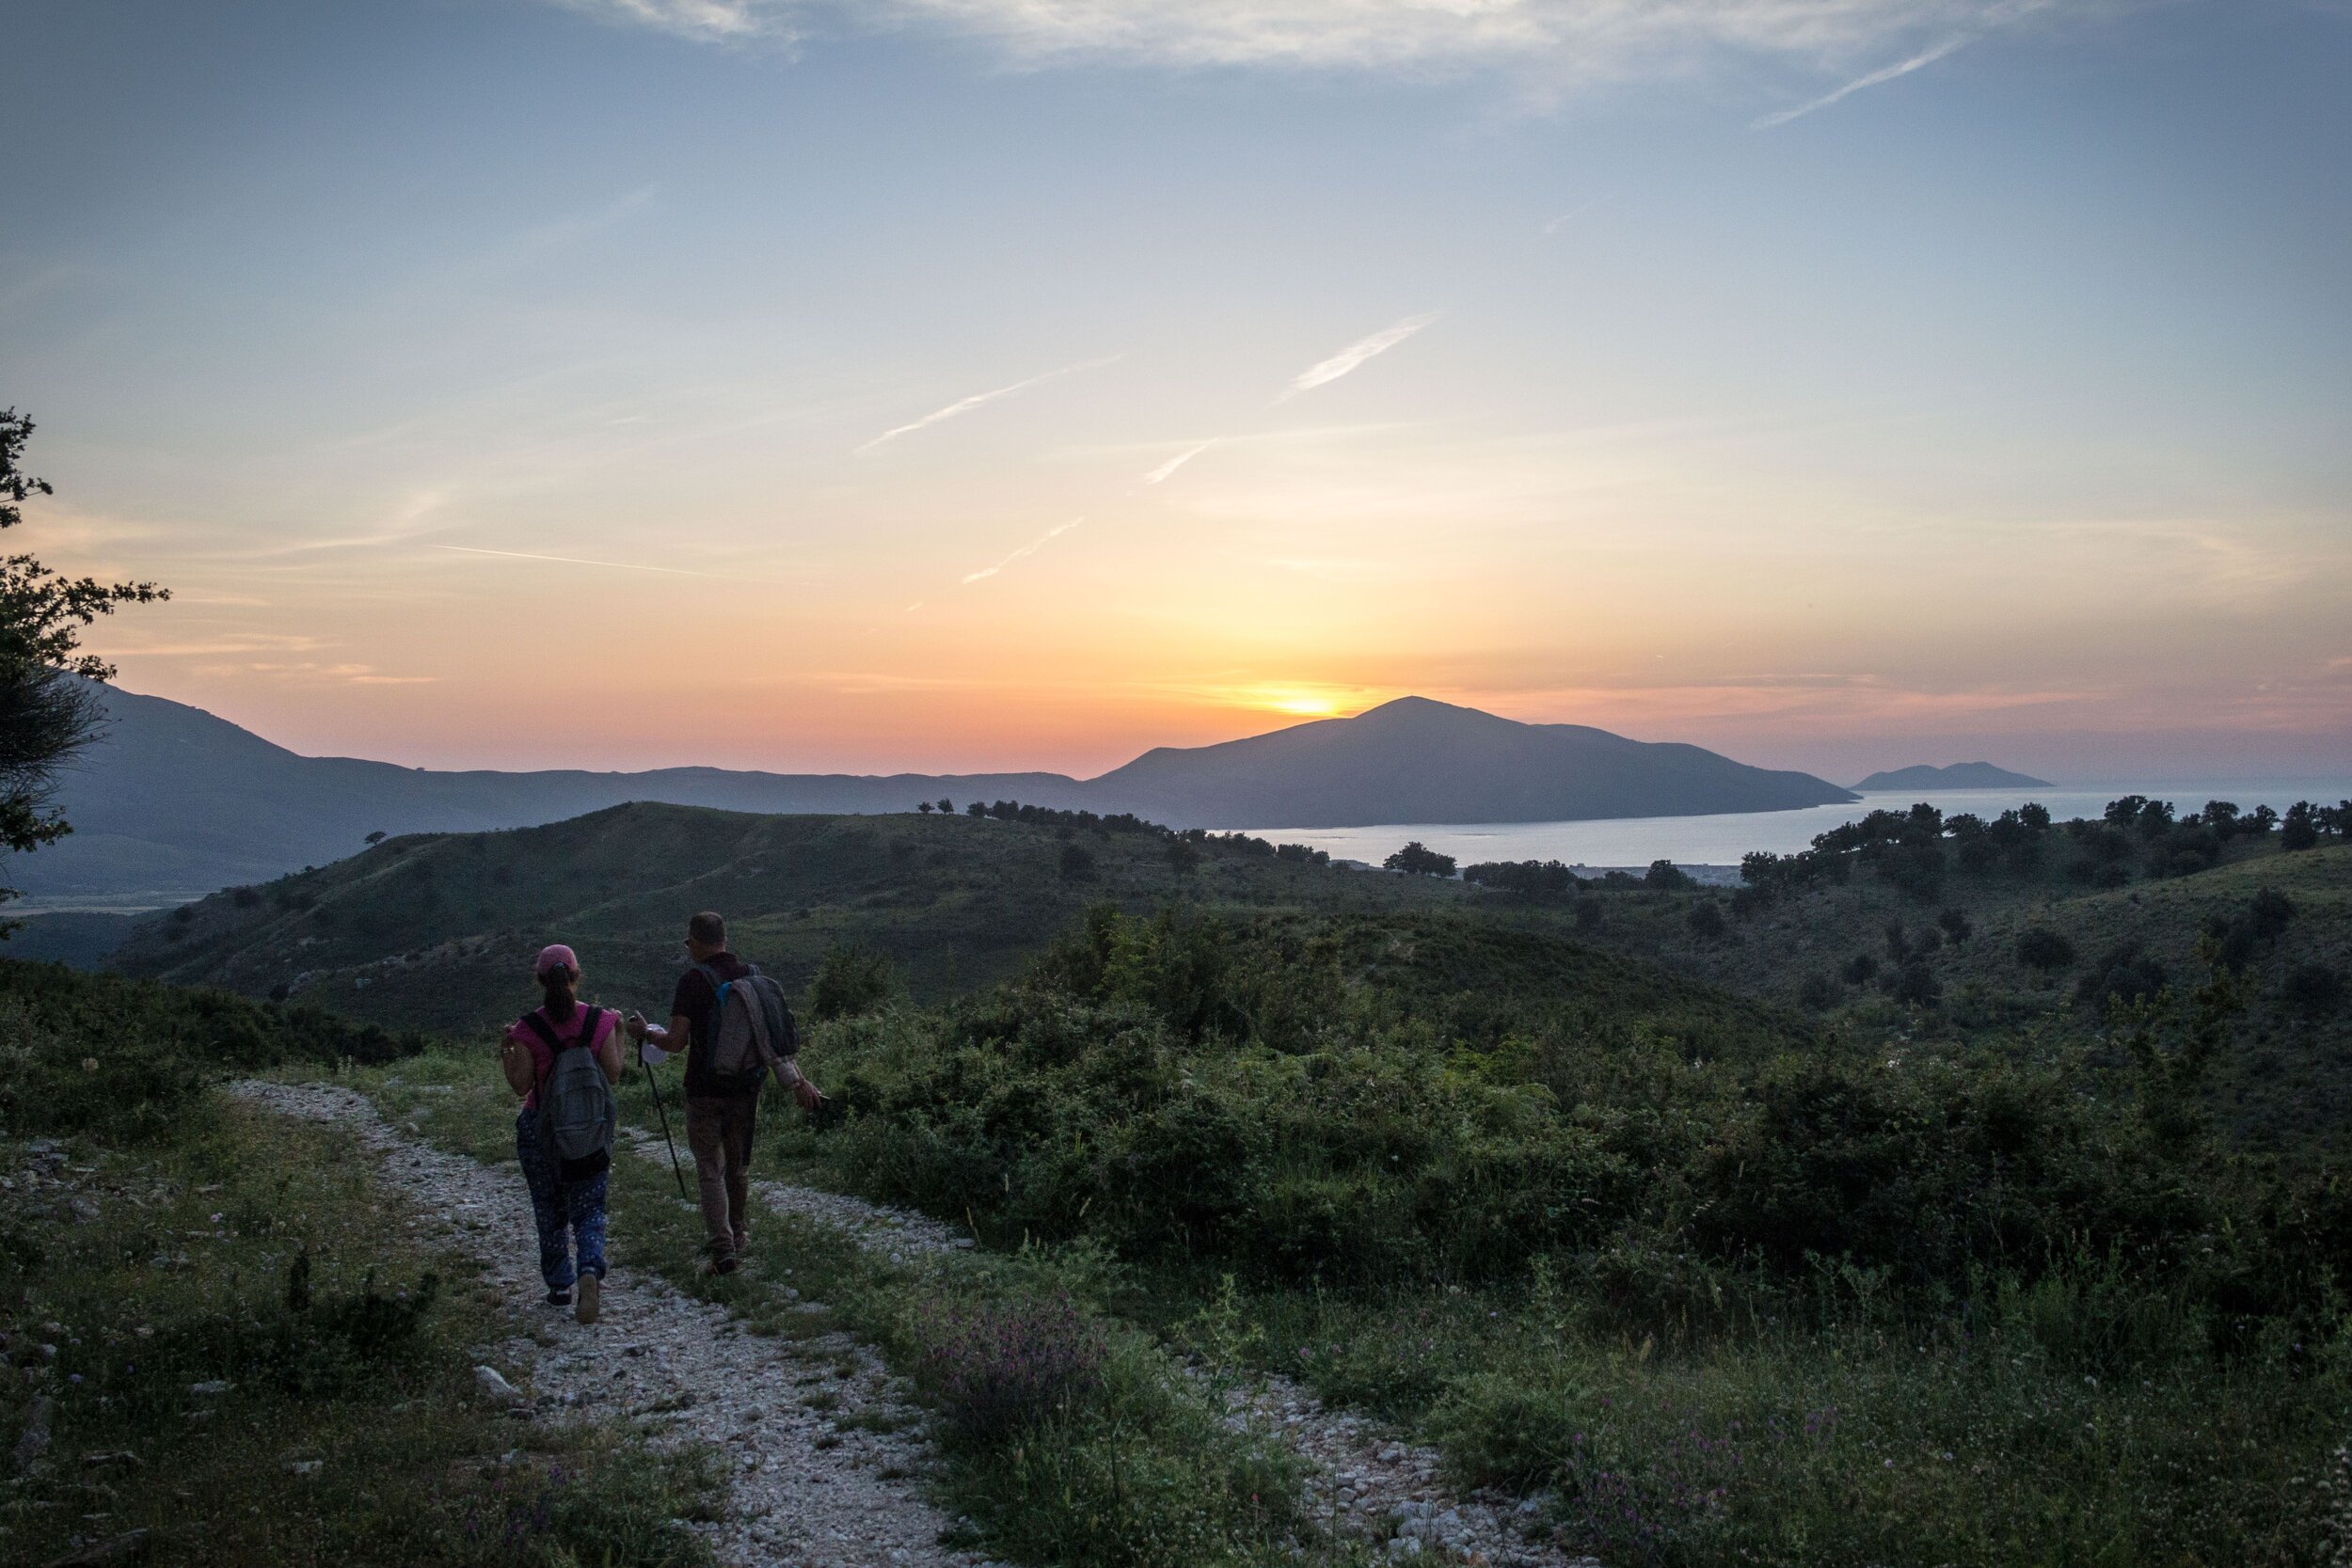 Landcape and Sunset, Vlore Region Protected Areas, Albania_Copryright AKZM.gov.al.jpg